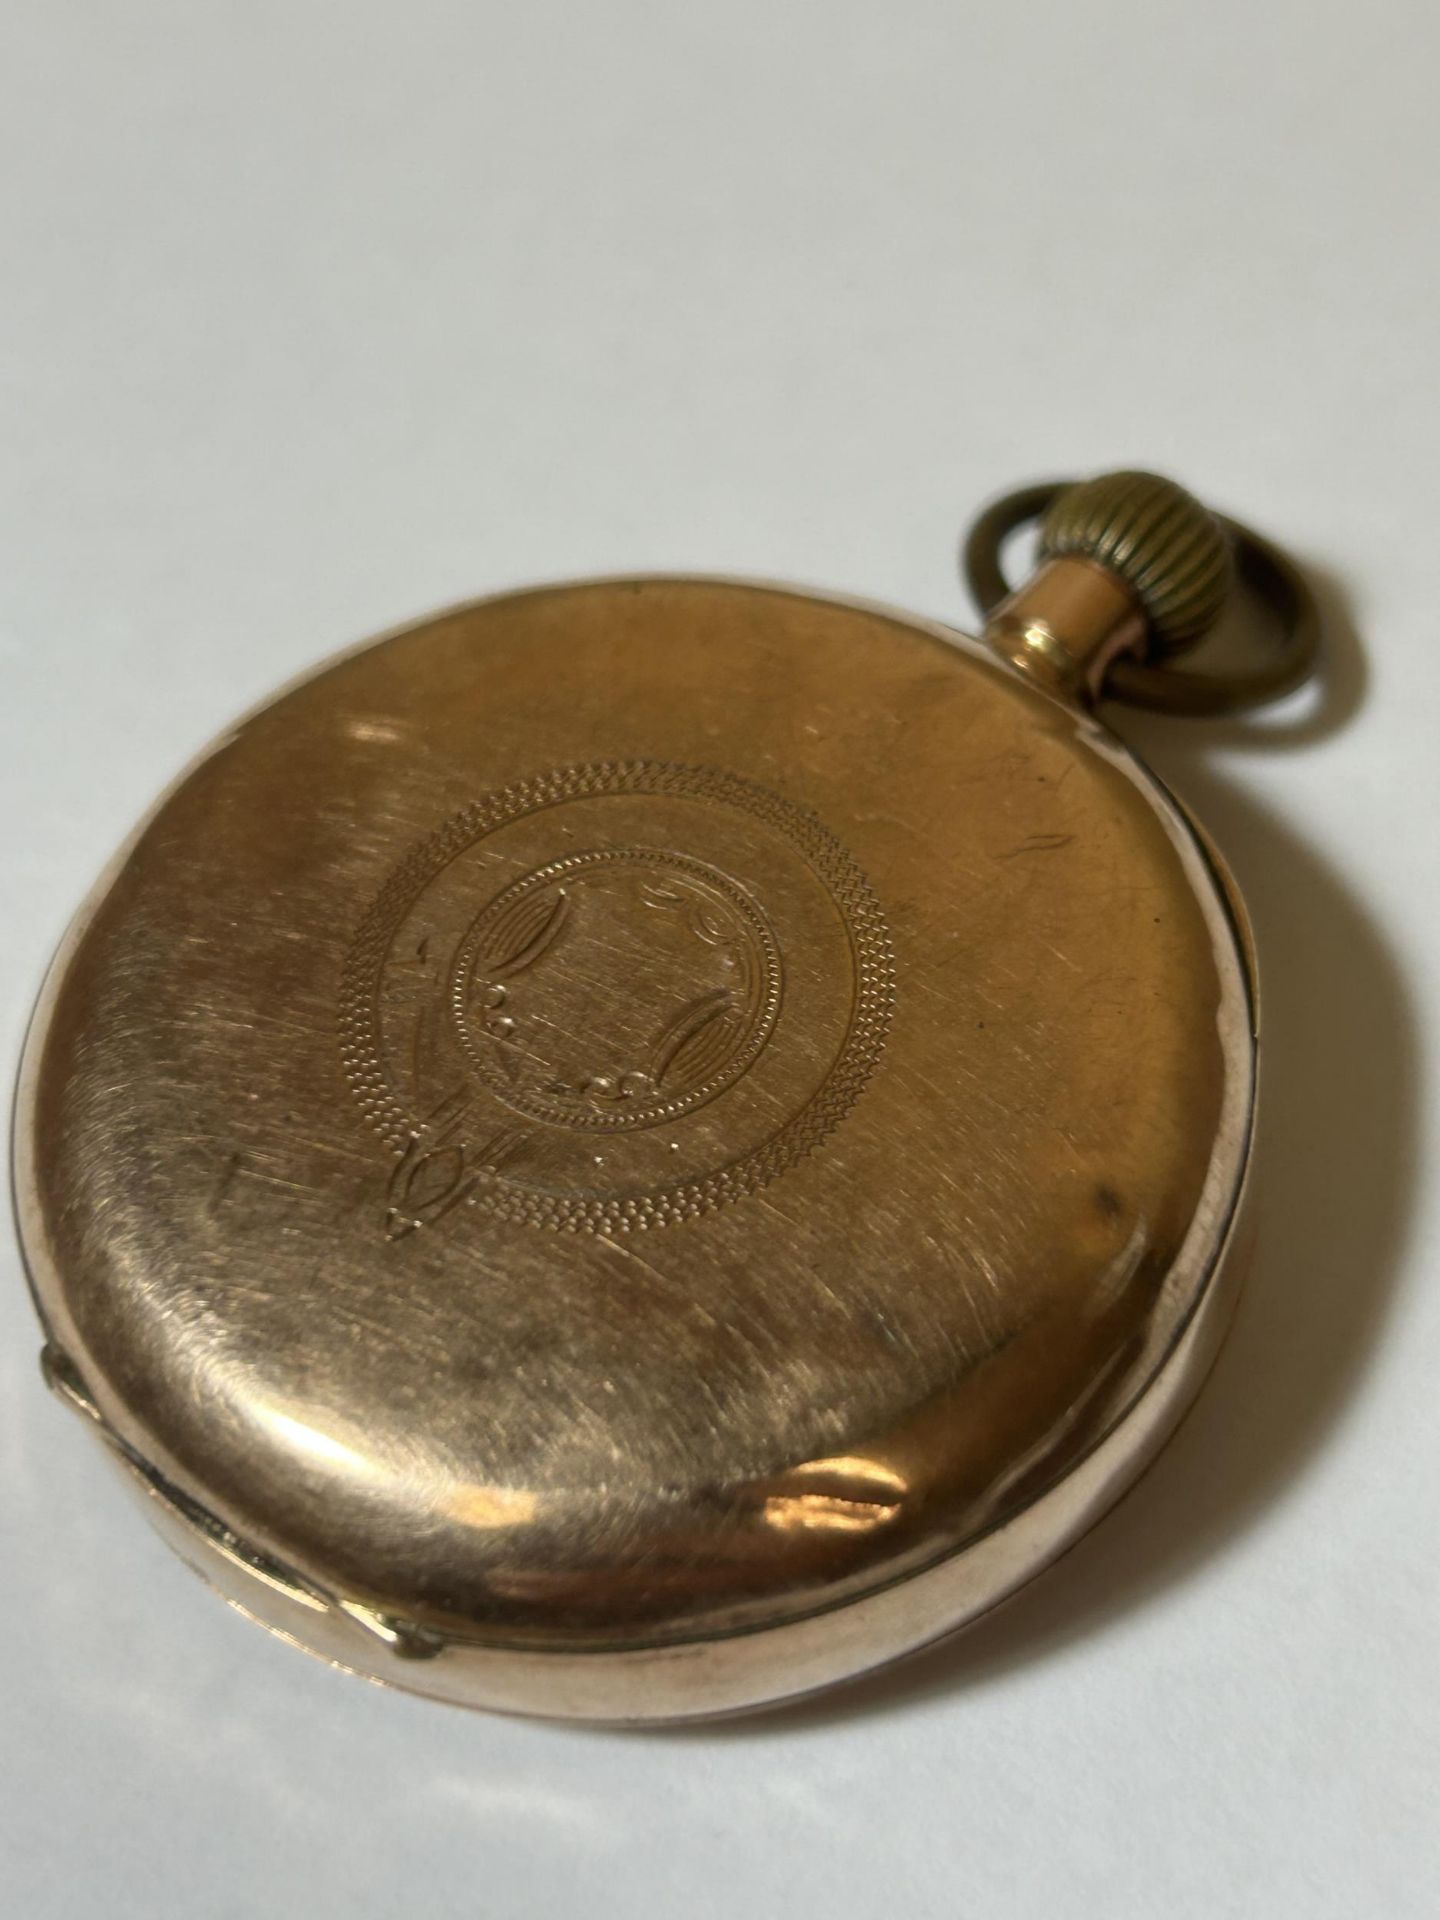 A 9CT YELLOW GOLD OPEN FACED POCKET WATCH GROSS WEIGHT 89.24 GRAMS WITH LEVER ESCAPEMENT AND A ROMAN - Image 3 of 5